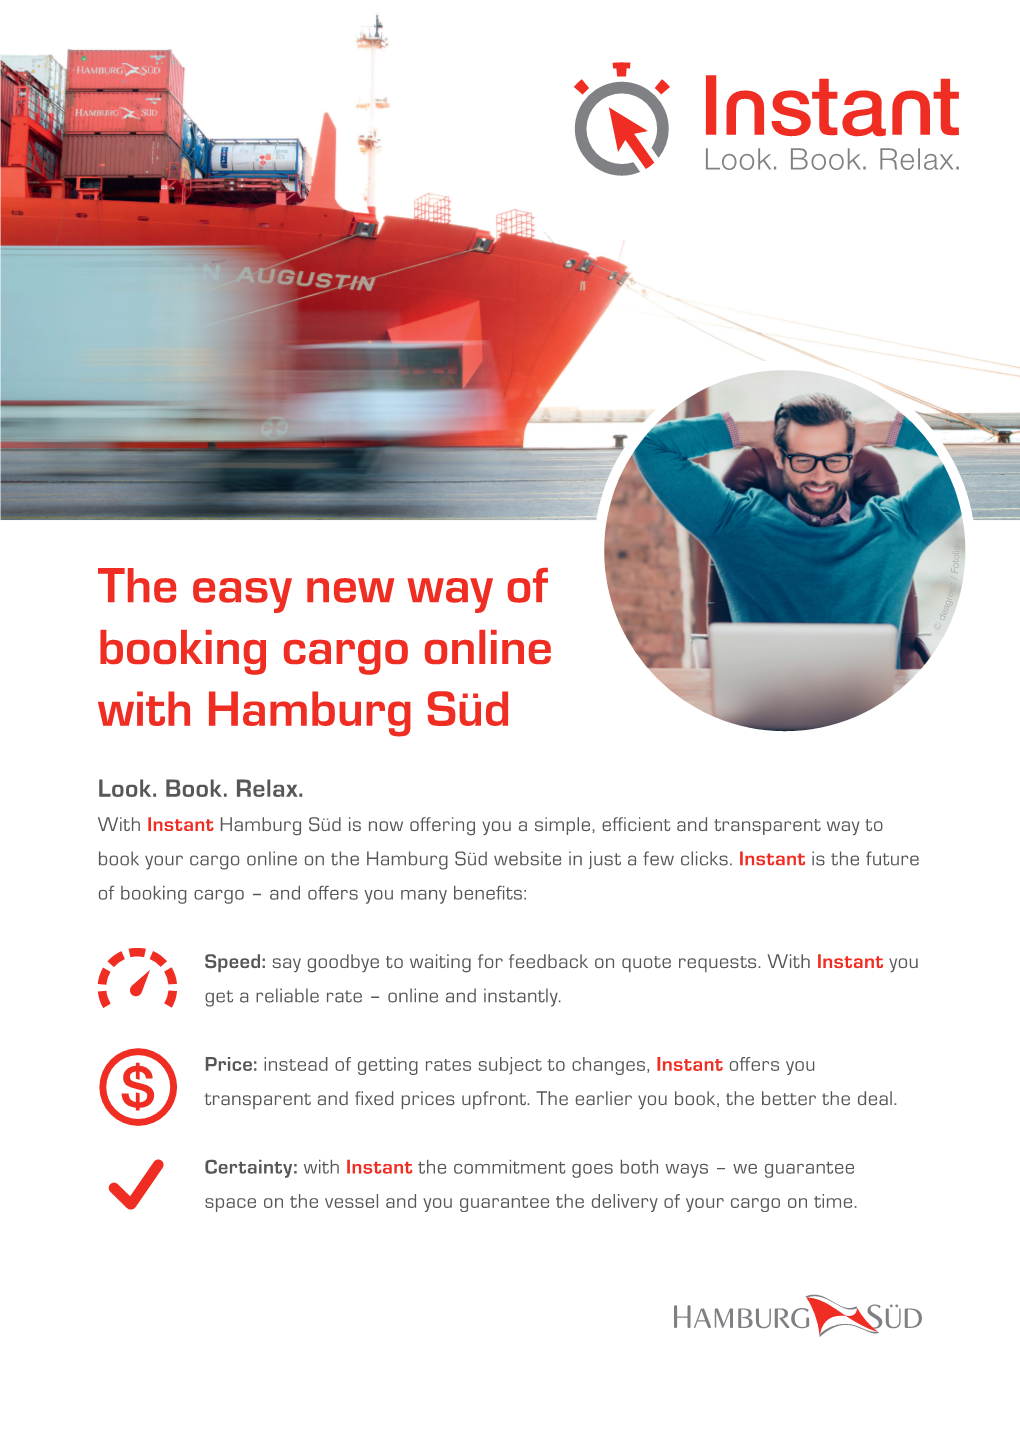 The Easy New Way of Booking Cargo Online with Hamburg